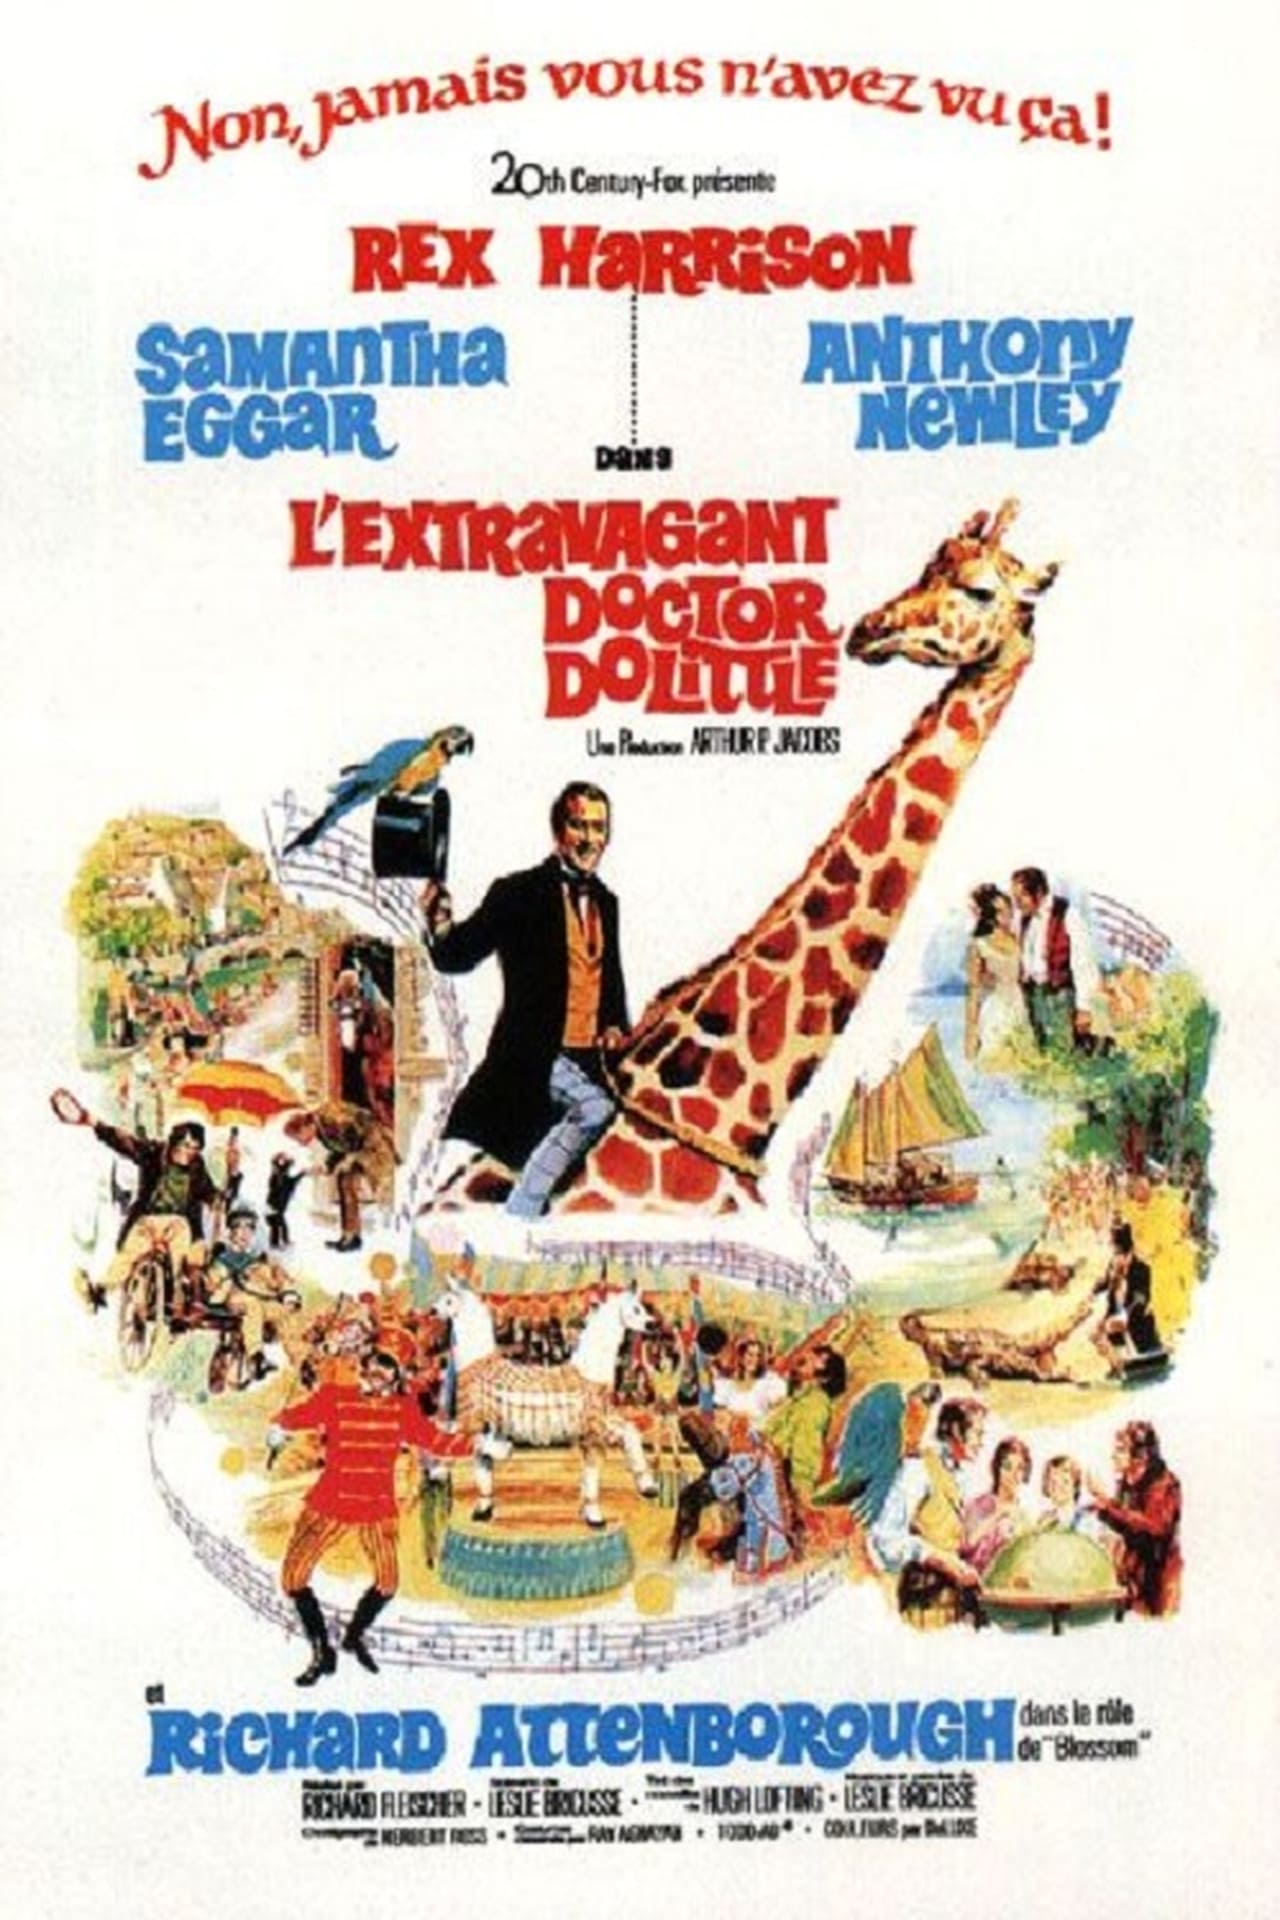 the story of doctor dolittle 1920